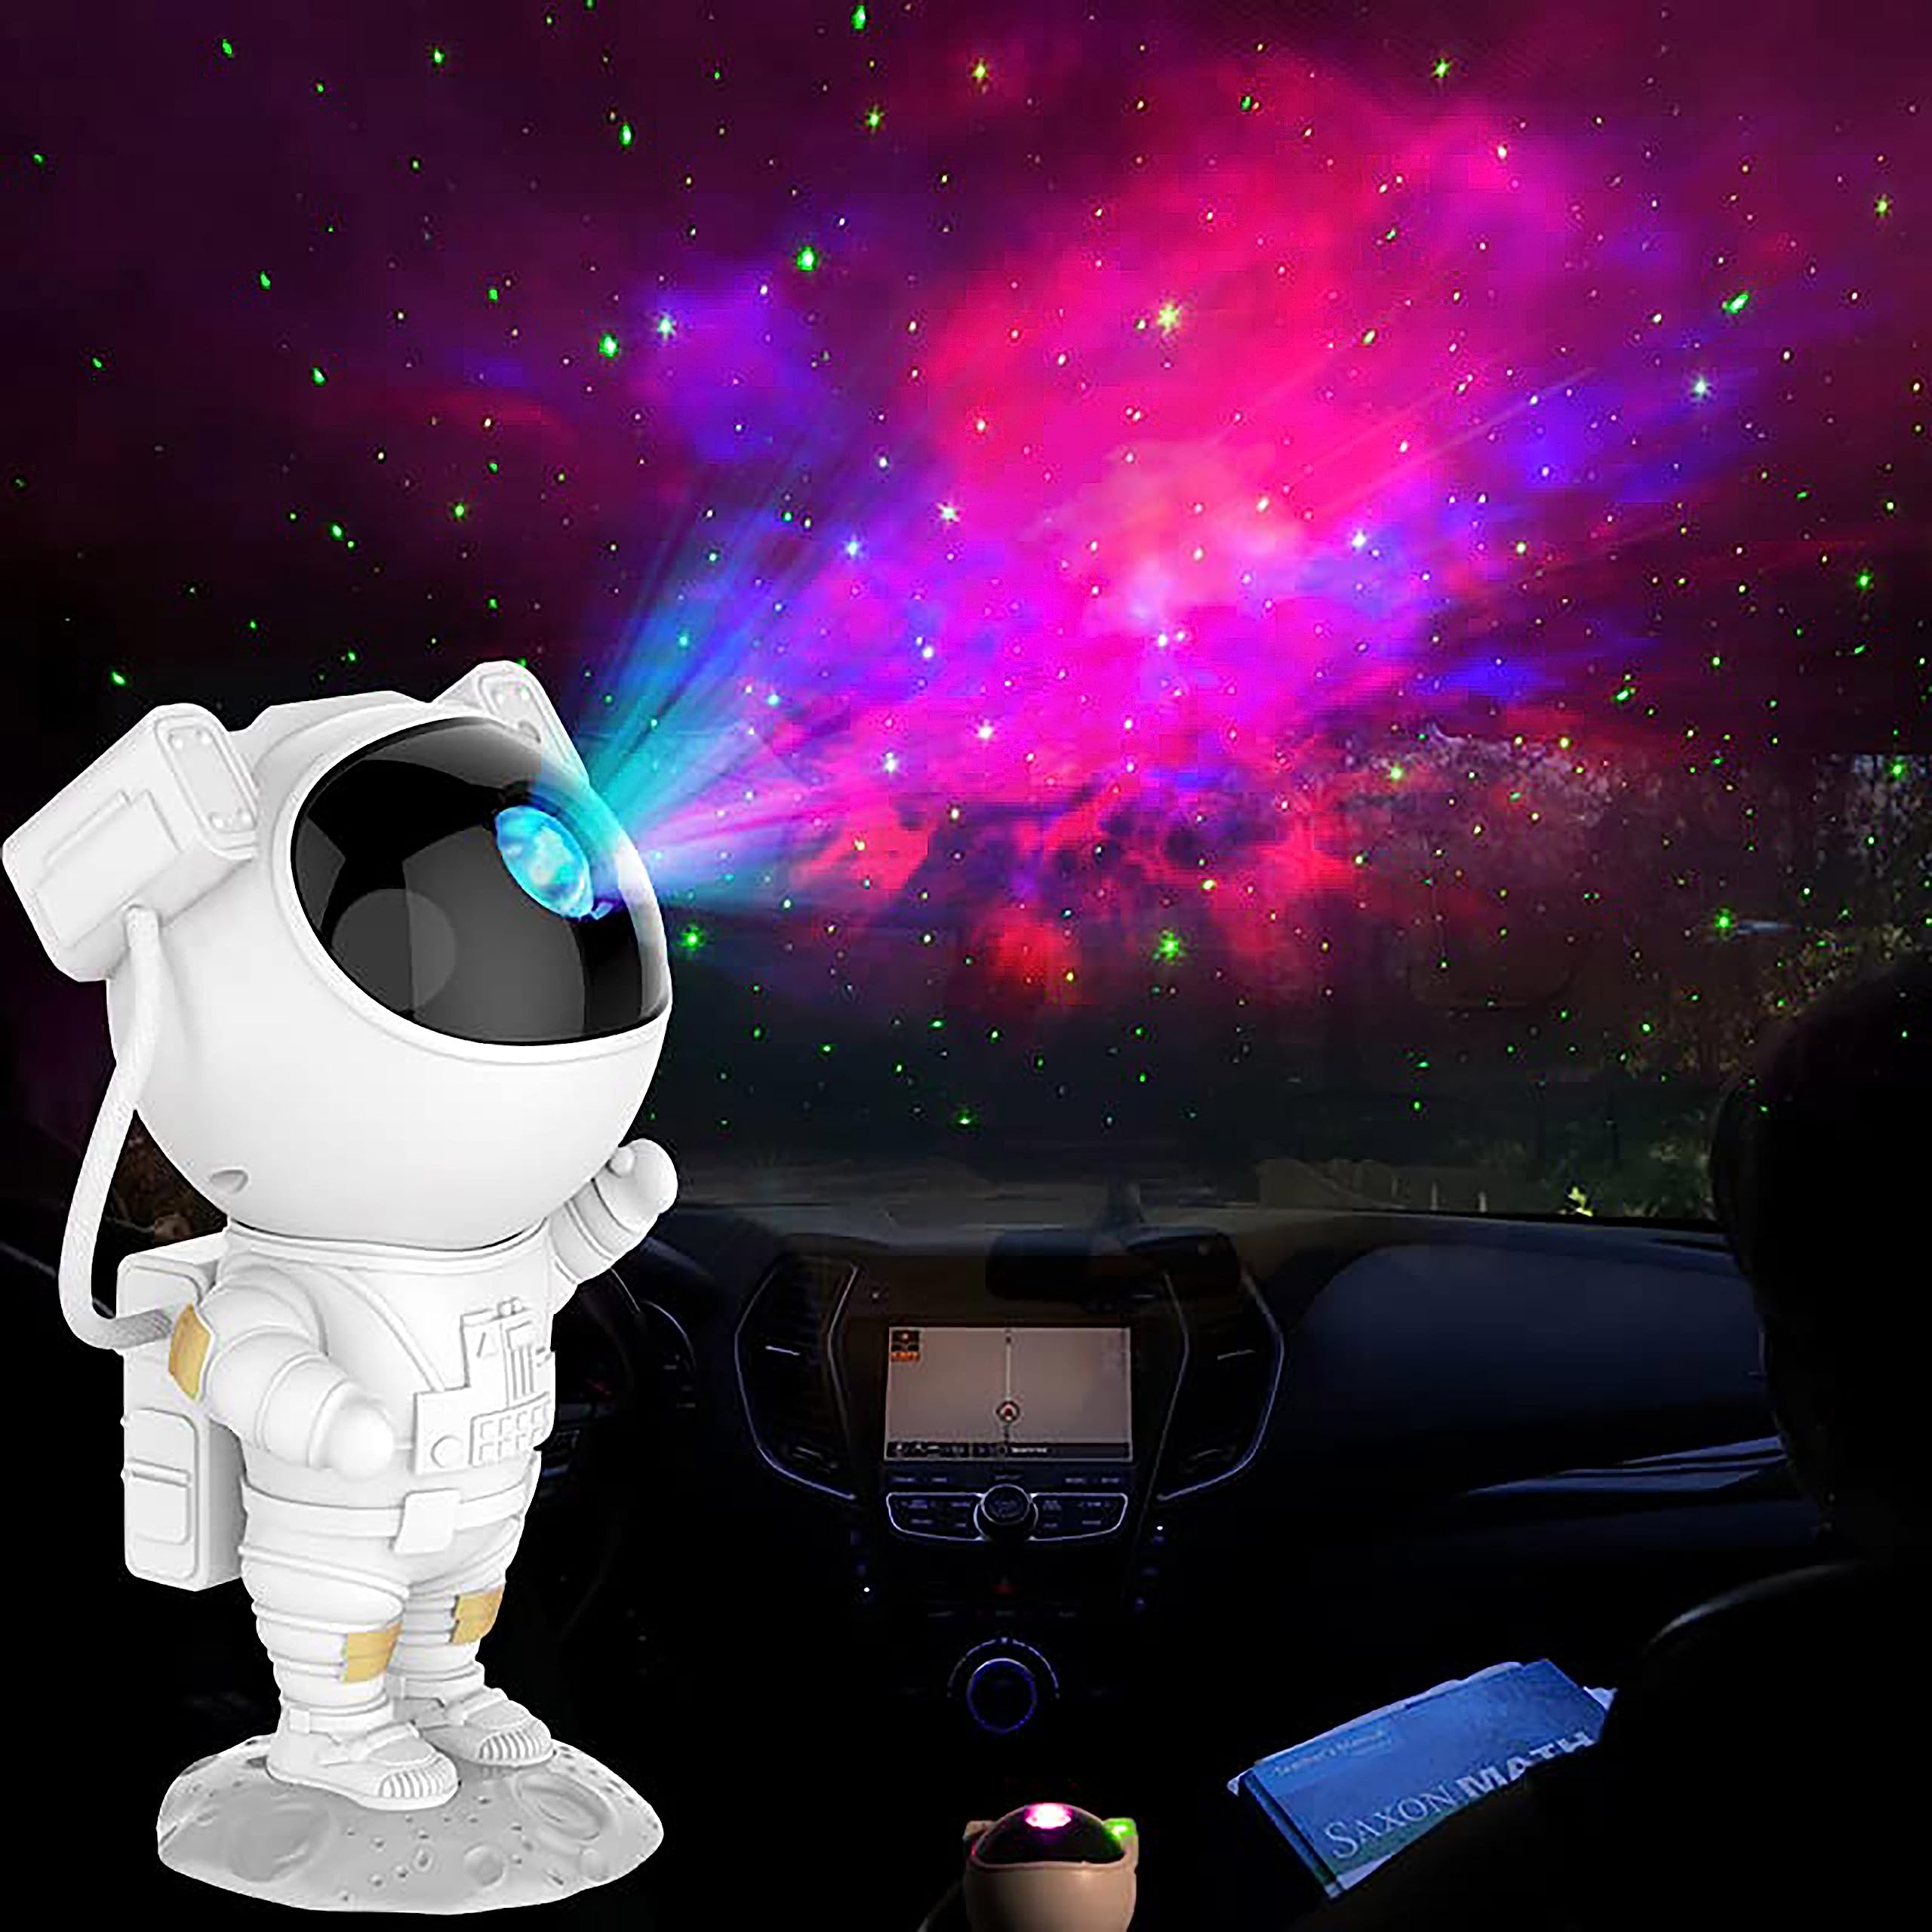 Joyradia Astronaut Projector Lamp Galaxy Projection LED Night Light Cartoon Spaceman Table Lamp Starry Nursery Colorful Change Children Baby Bedroom Home Decor Creative Gift